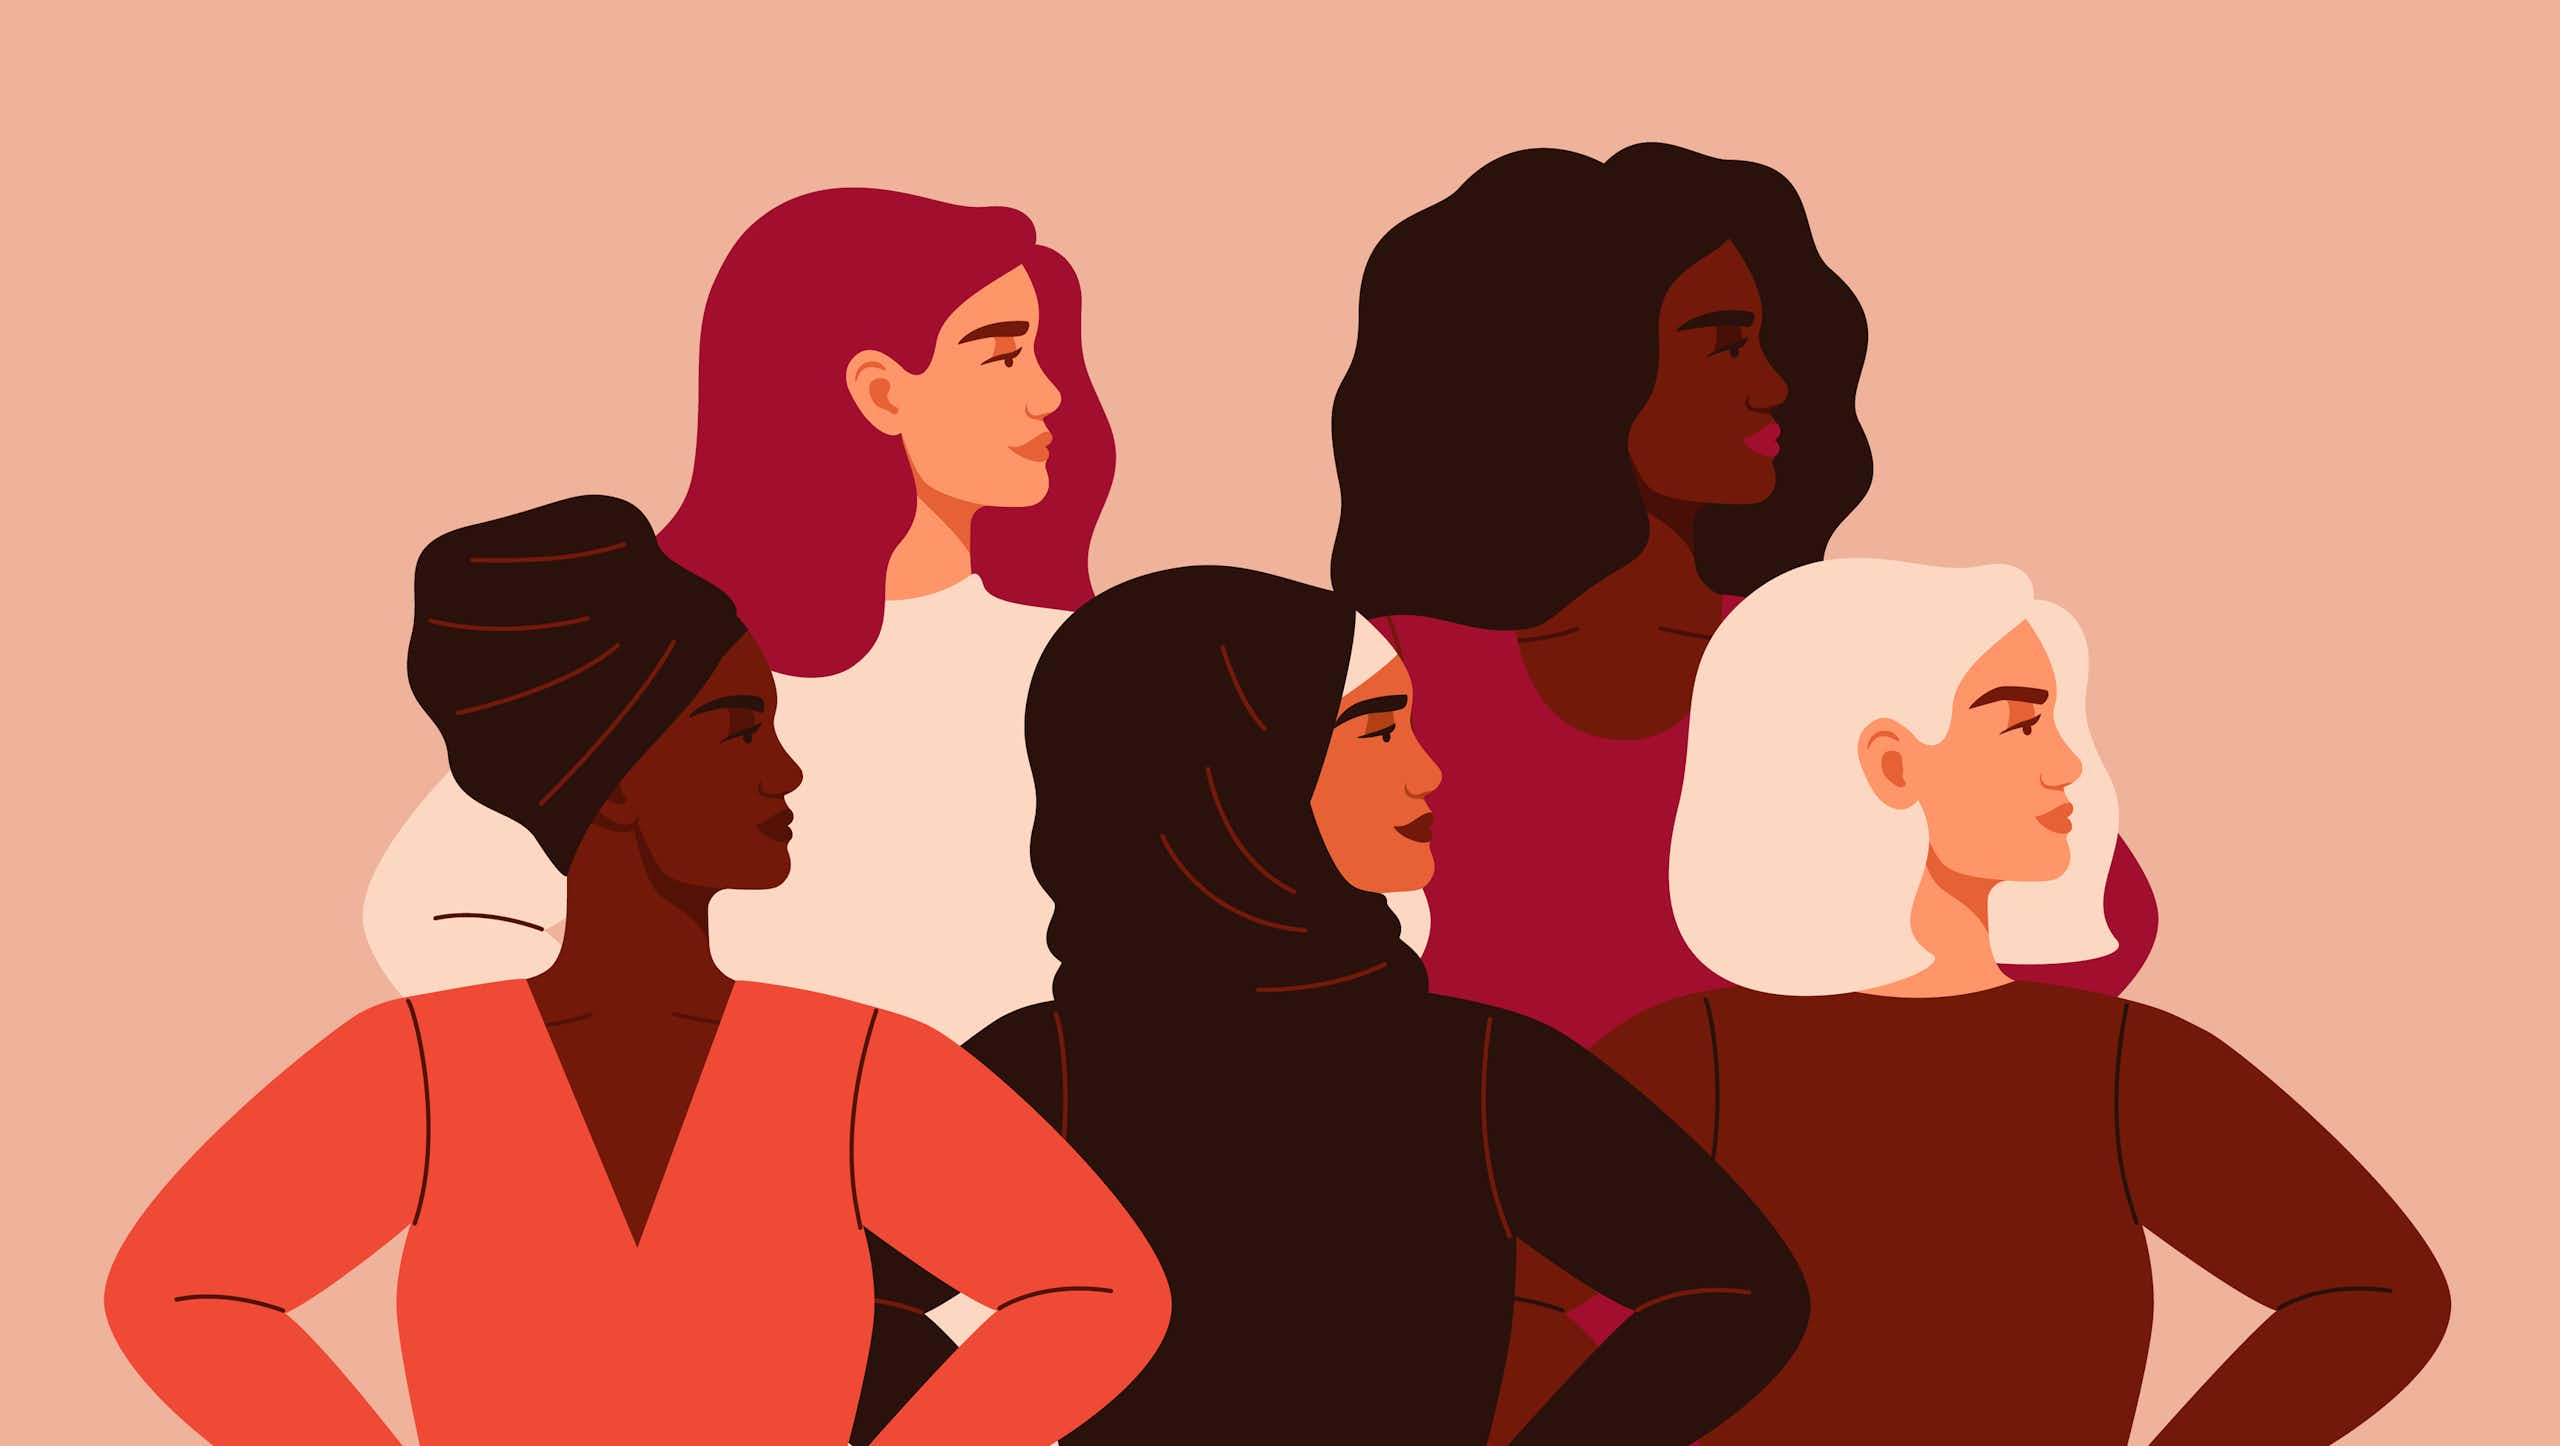 illustration in varying shades of pink and brown of five women of different ethnicities, all looking to their left in confidence